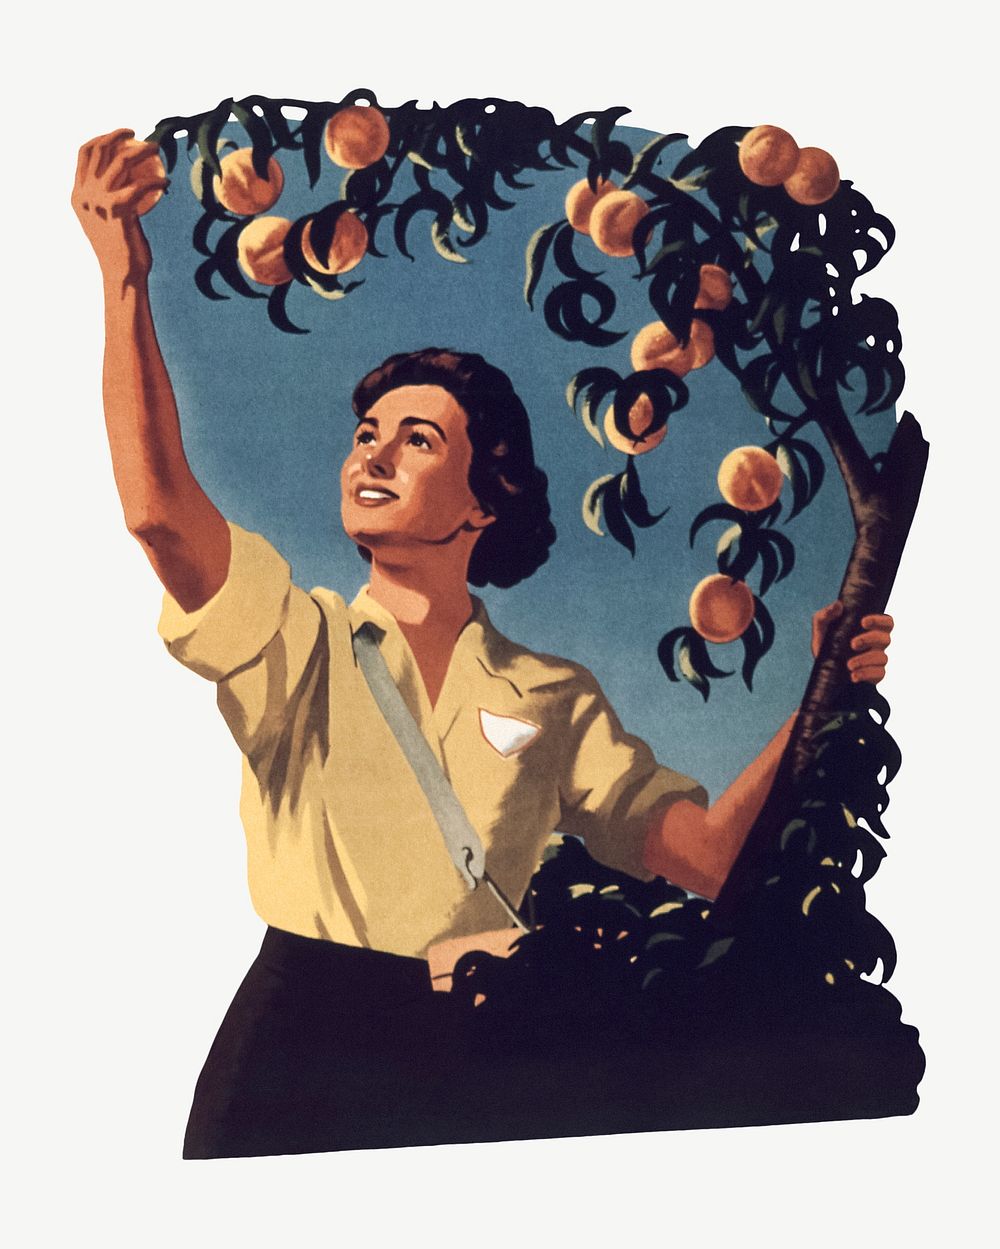 Woman picking fruit vintage illustration psd. Remixed by rawpixel. 